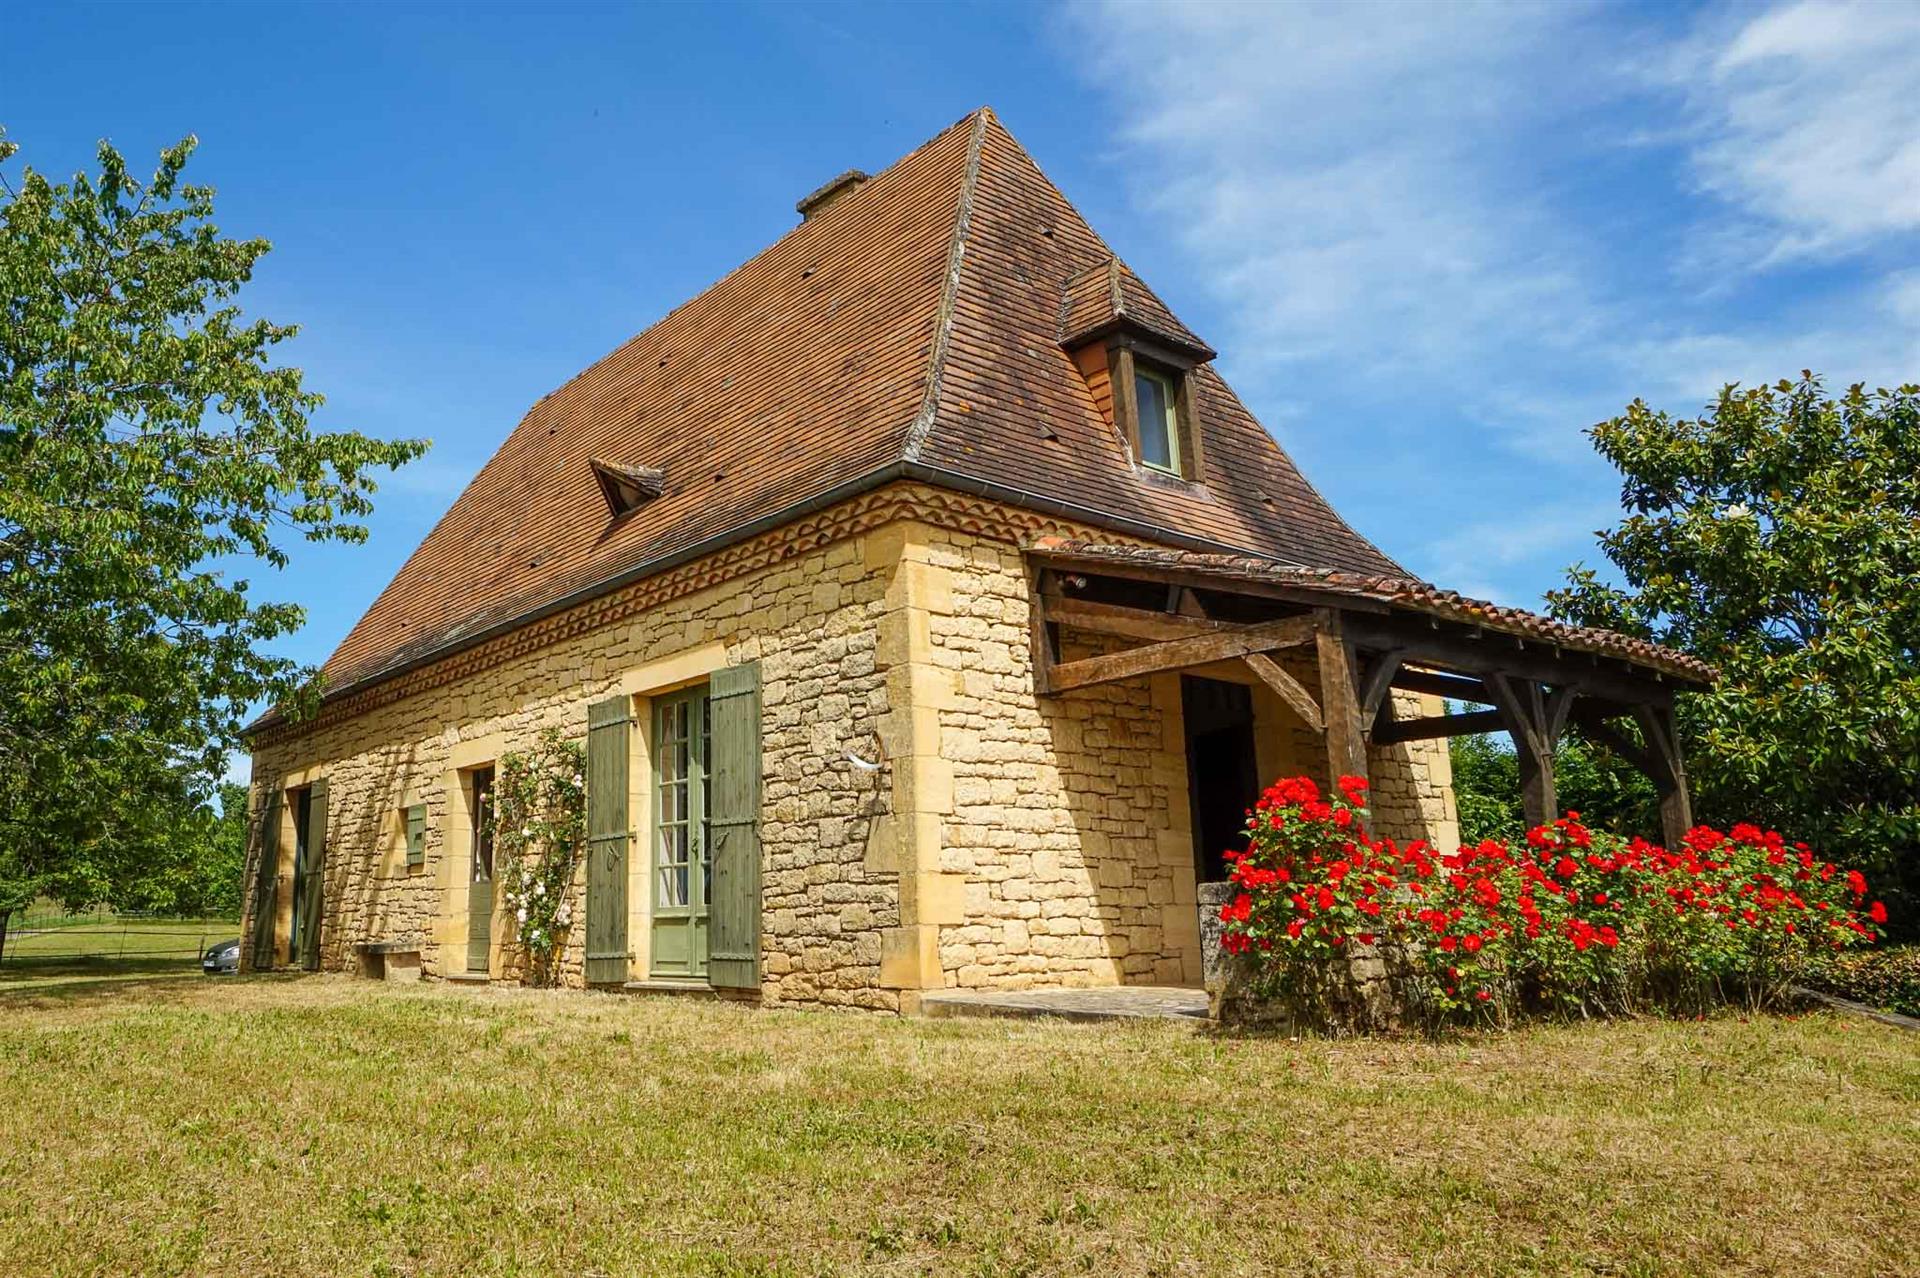 property for sale in sarlat france